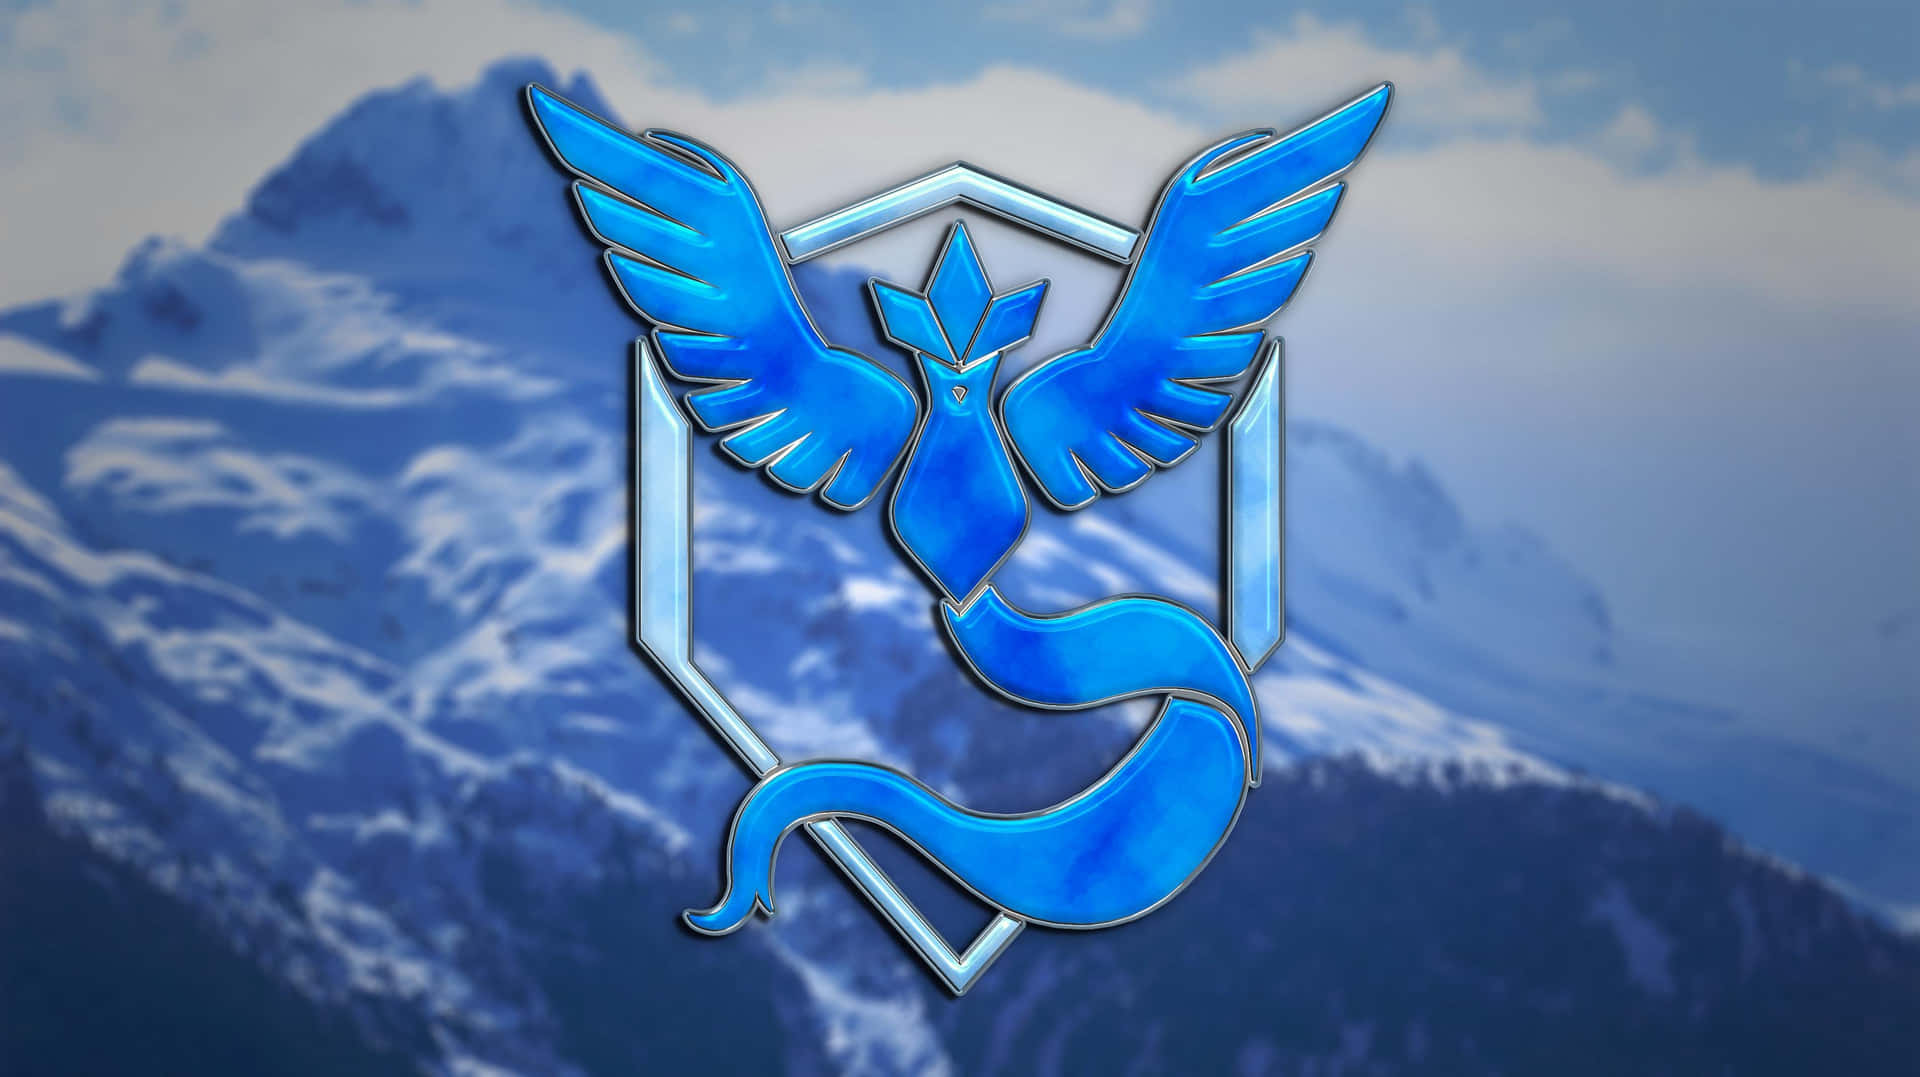 Image Join Team Mystic In The Quest For Pokémon Master!